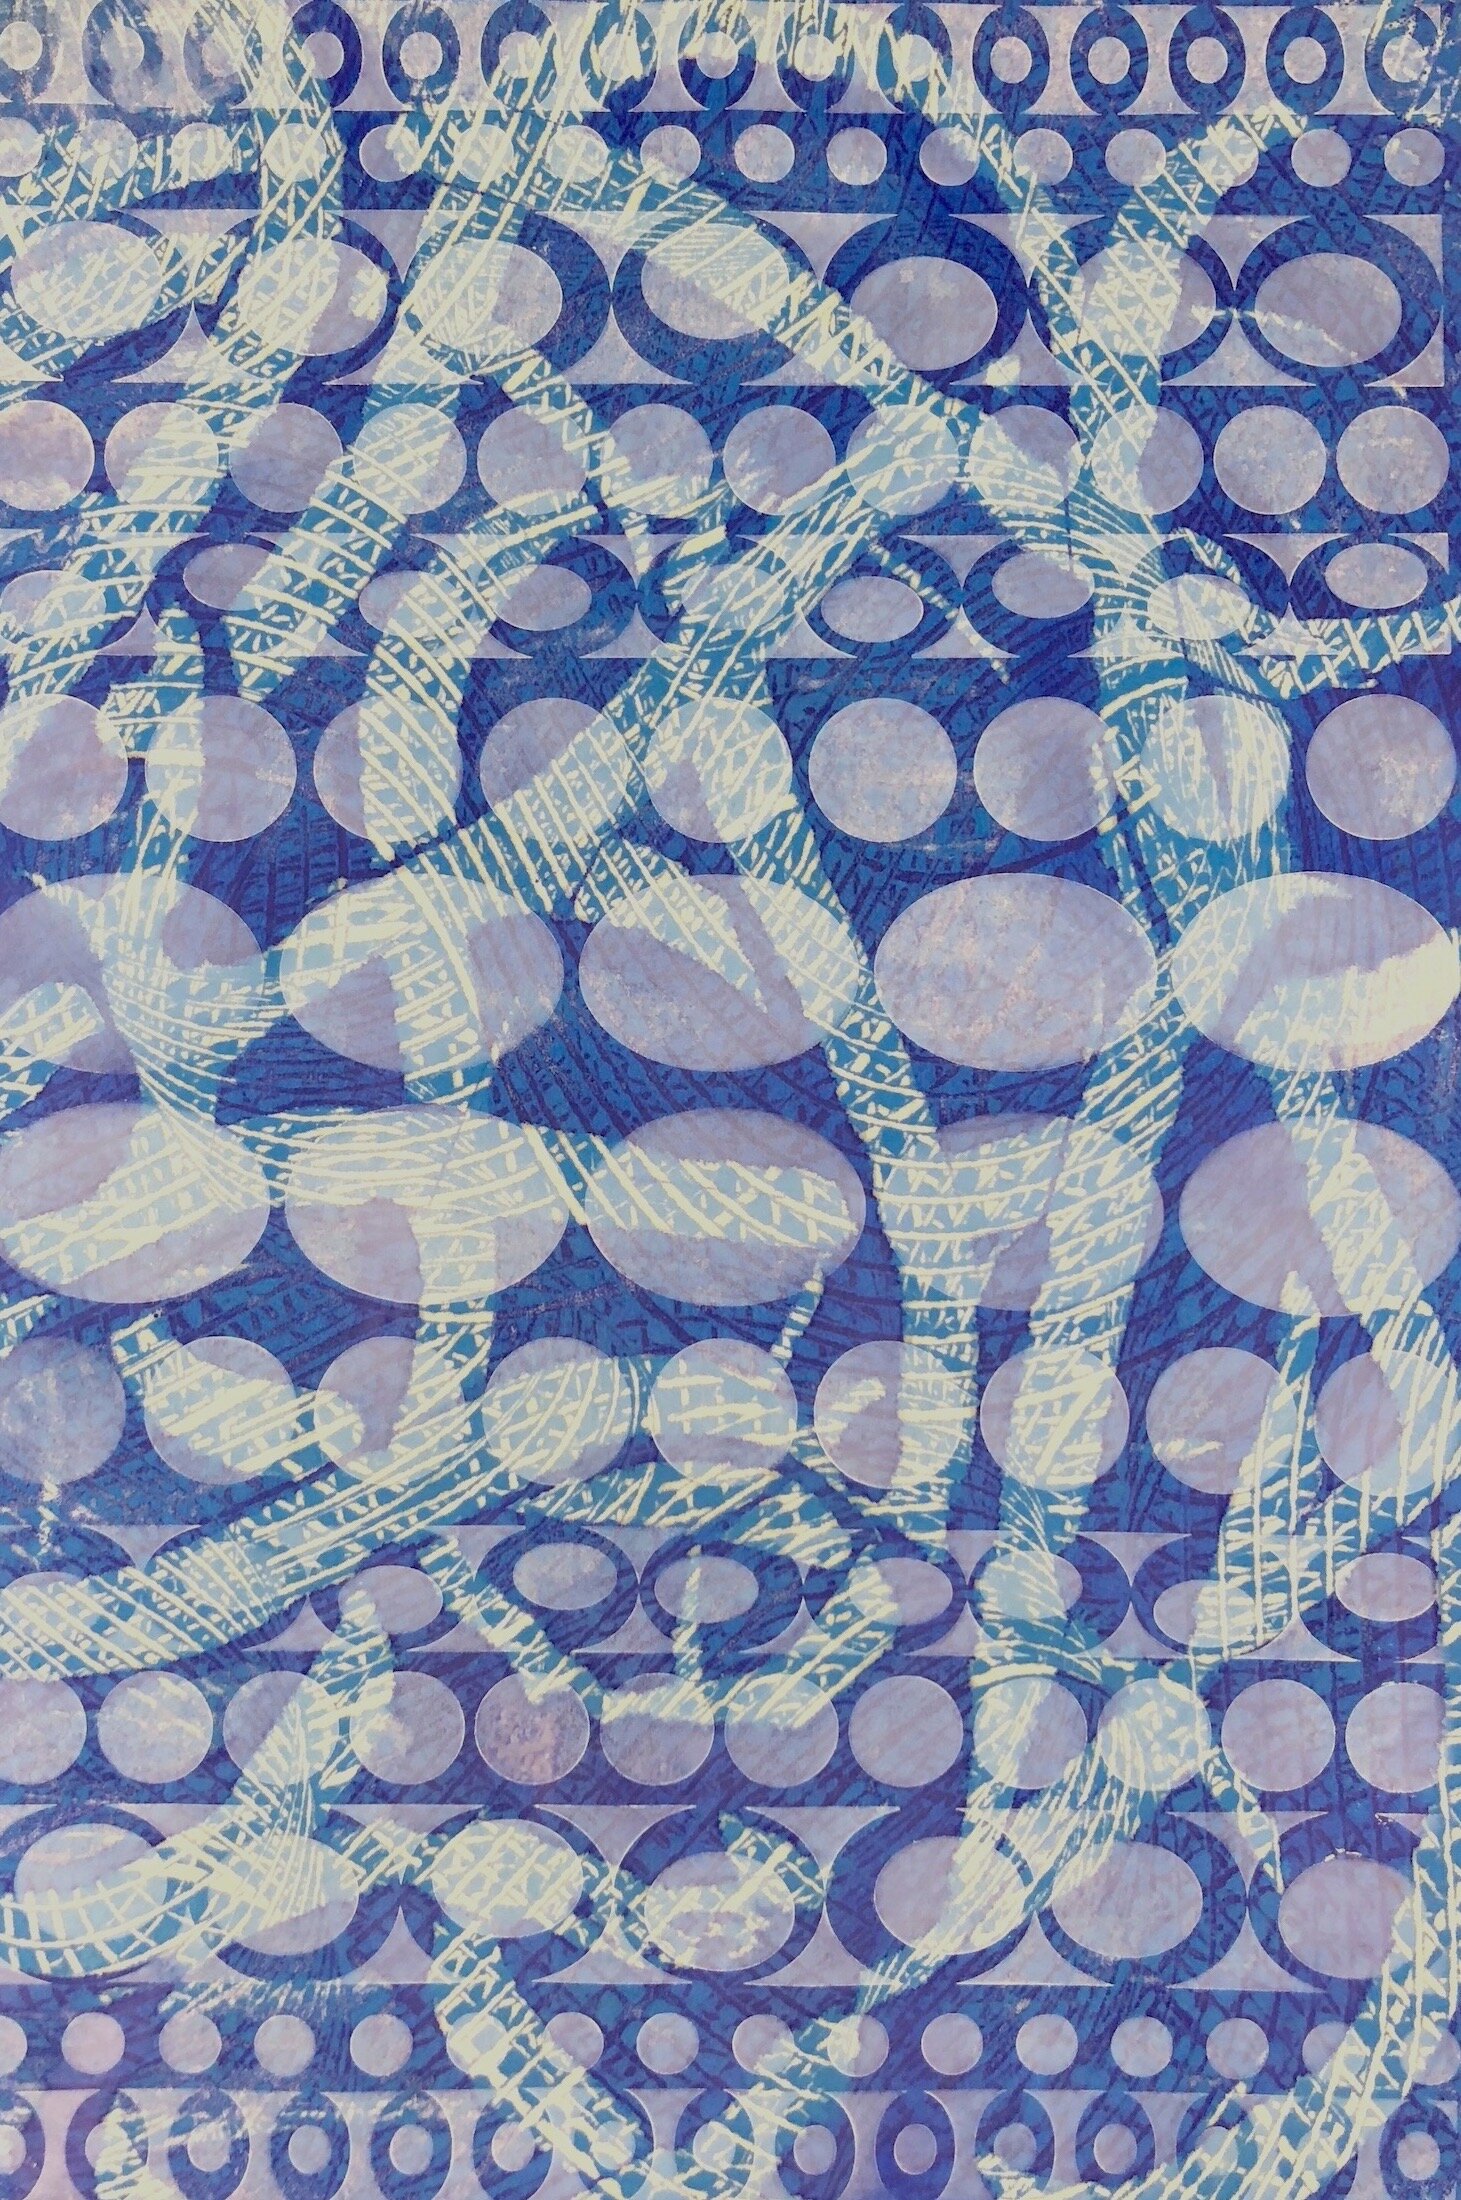    Tangled Blue    encaustic monotype, pastel on paper, 17.5 x 11.5 inches 